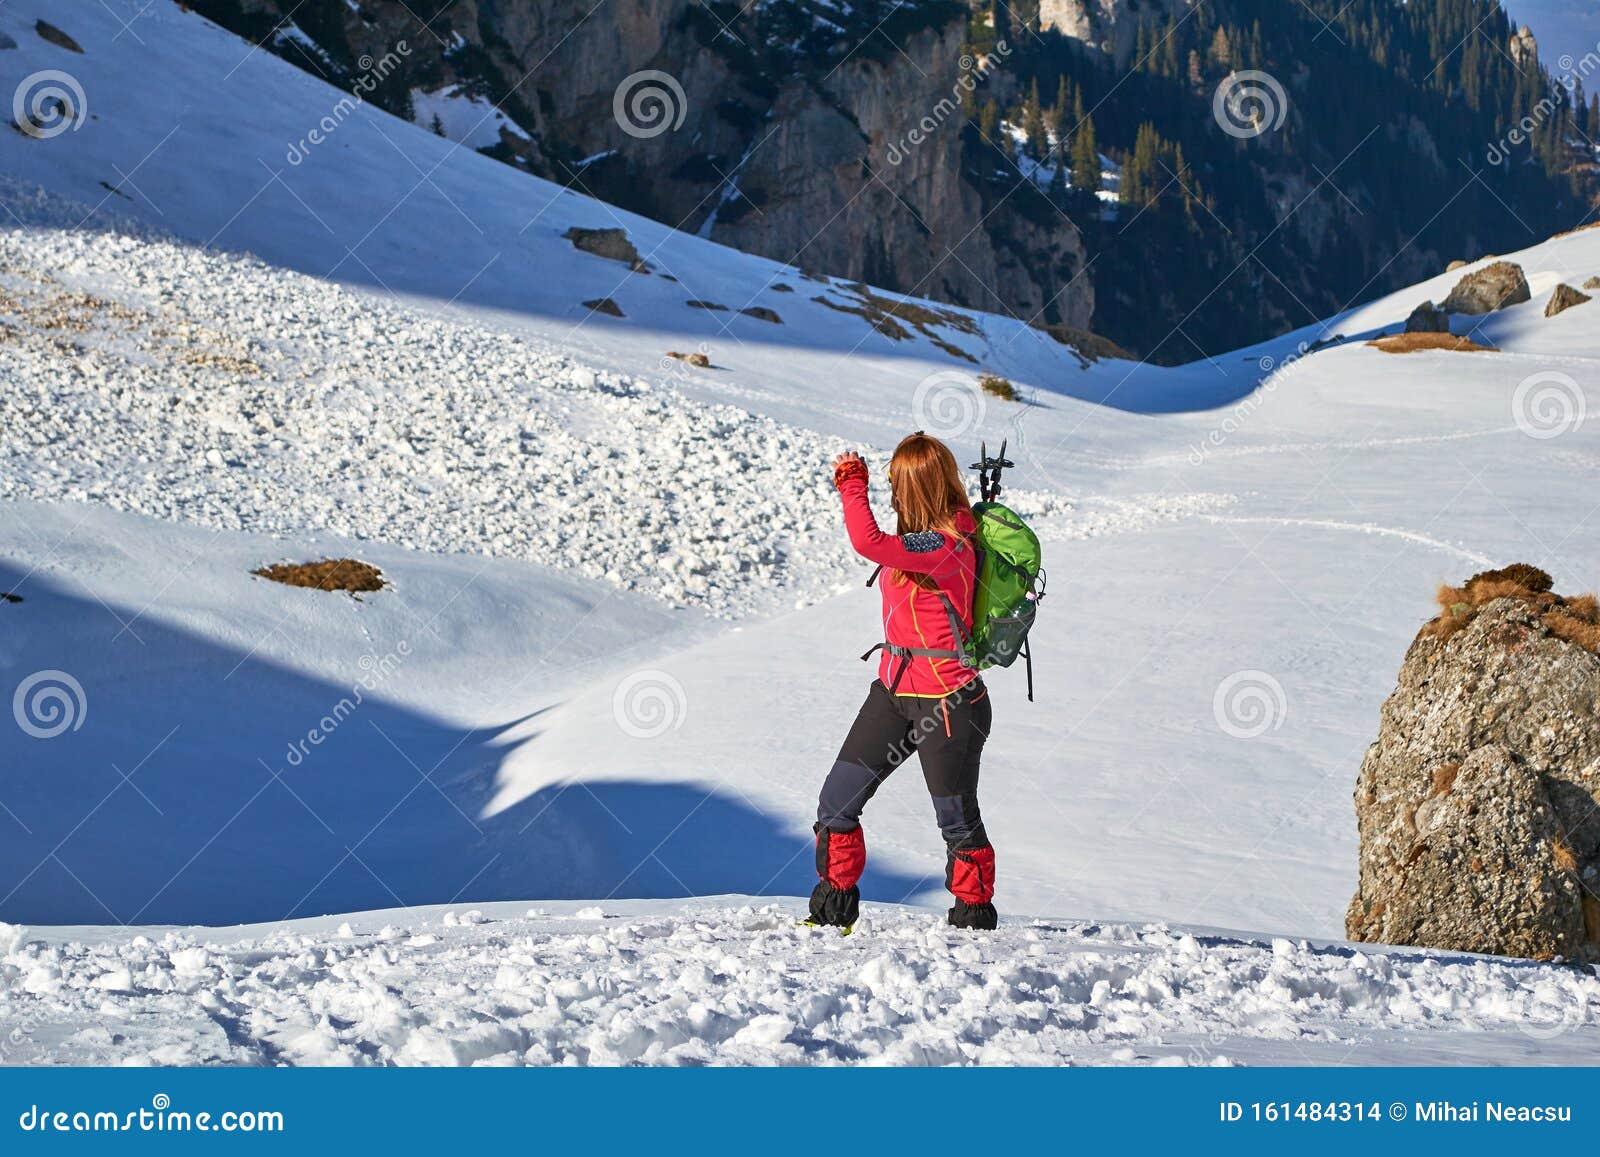 woman hiker looking back towards a recent wet snow avalanche, in malaiesti valley, bucegi mountains, romania